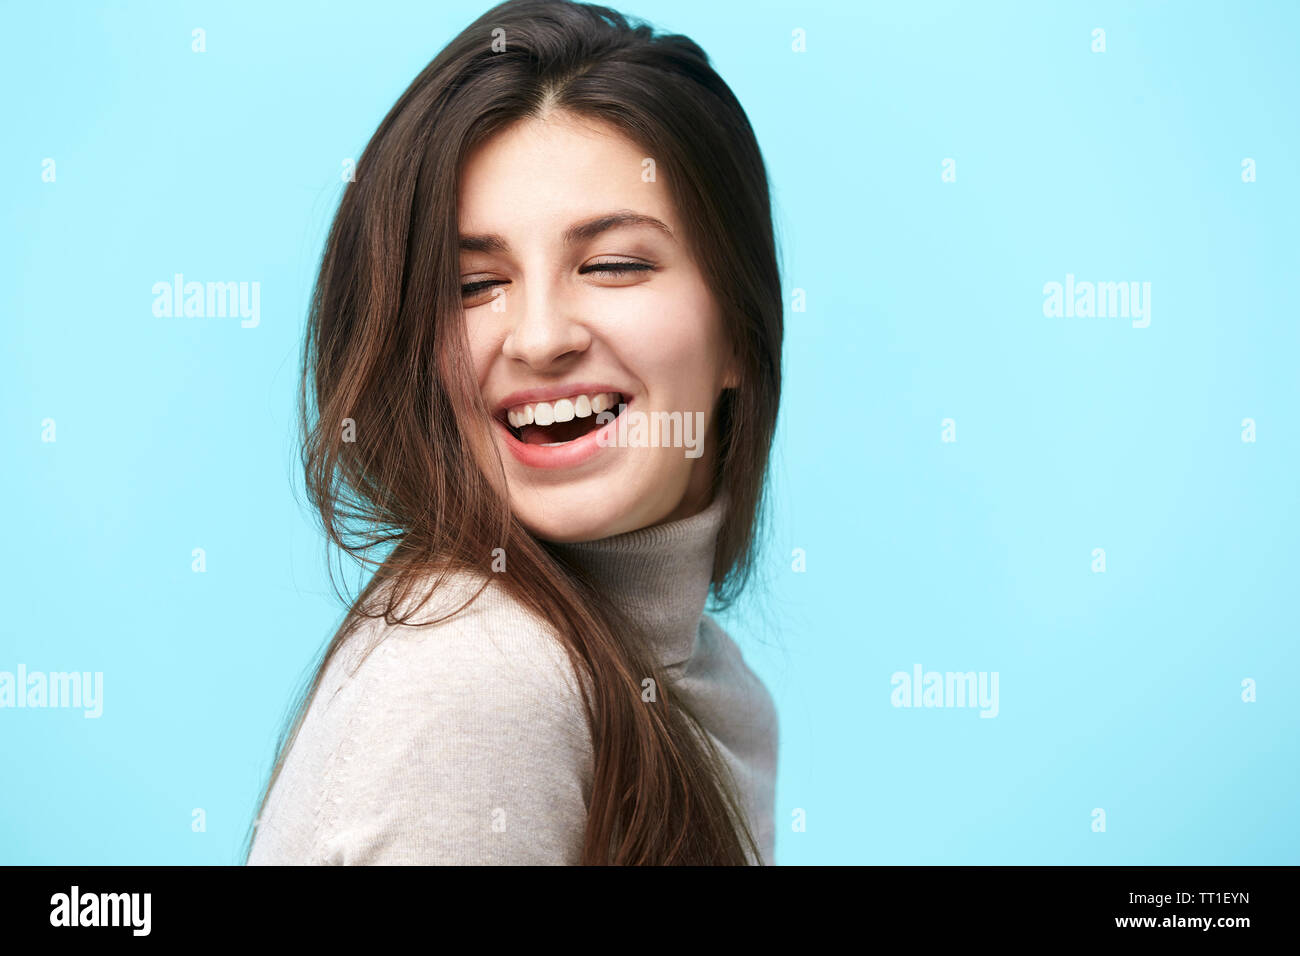 portrait of a young caucasian woman with long hair, happy and smiling, isolated on blue background Stock Photo